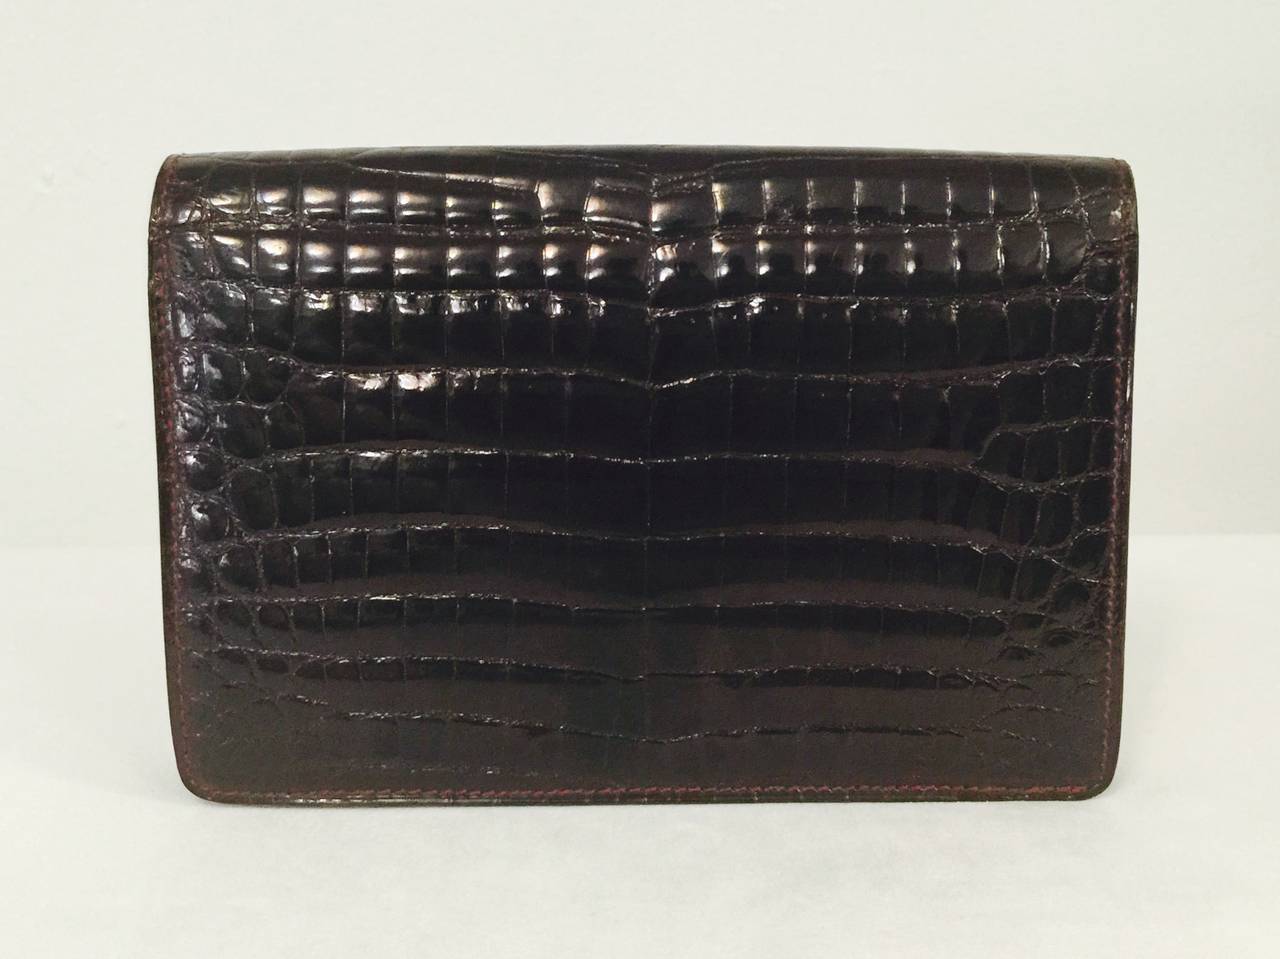 Vintage Balenciaga Burgundy Baby Crocodile Convertible Clutch is an ode to the traditions of the Parisian haute couture houses.  Considered by Diana Vreeland as the very best of the best couturiers, Cristobal Balenciaga was responsible for some of